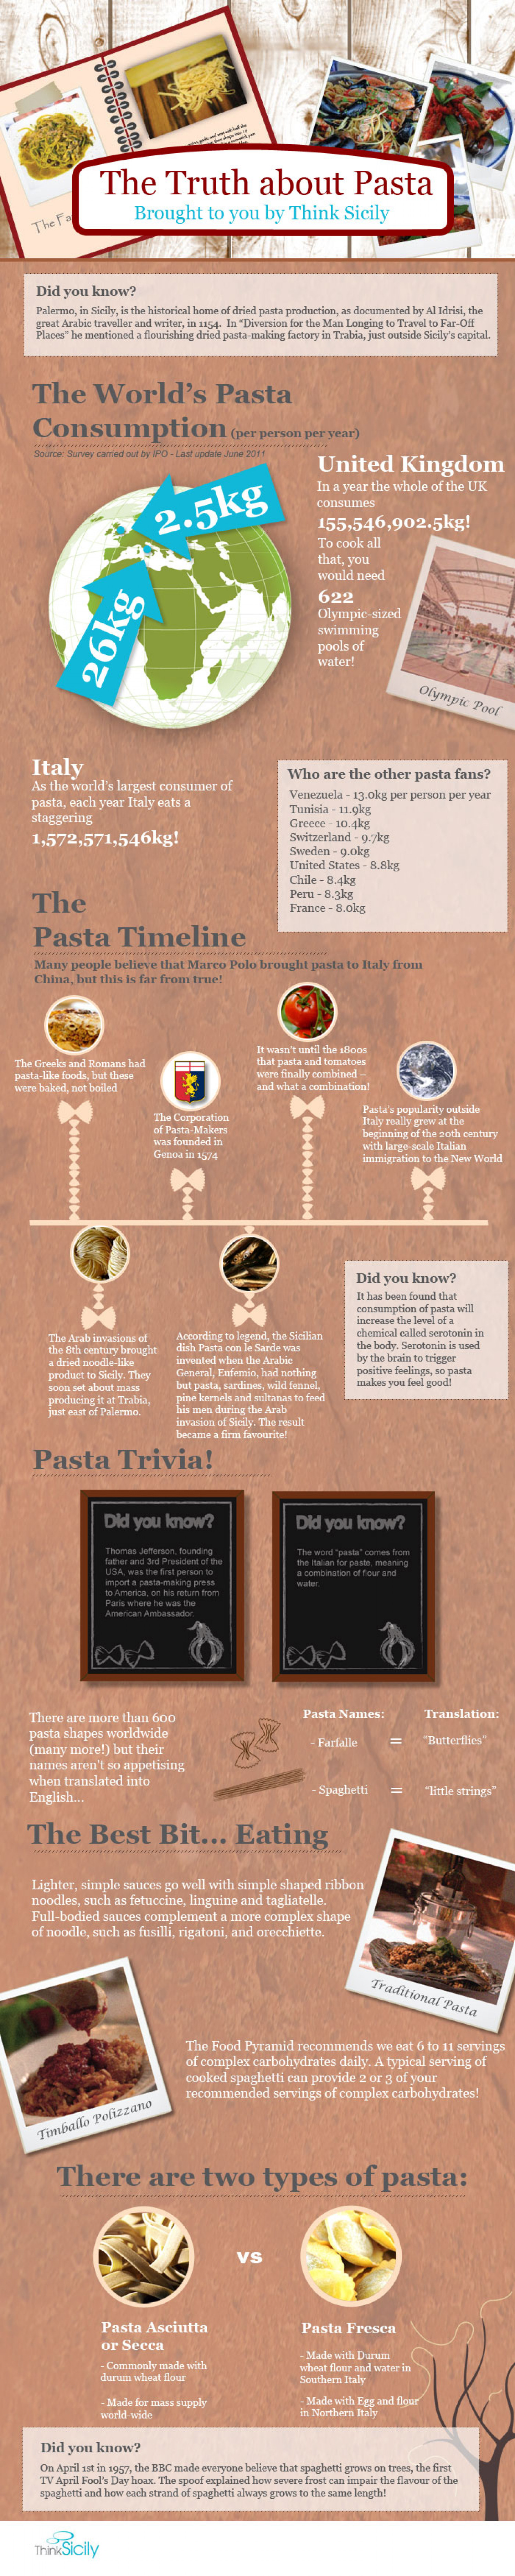 The Truth About Pasta